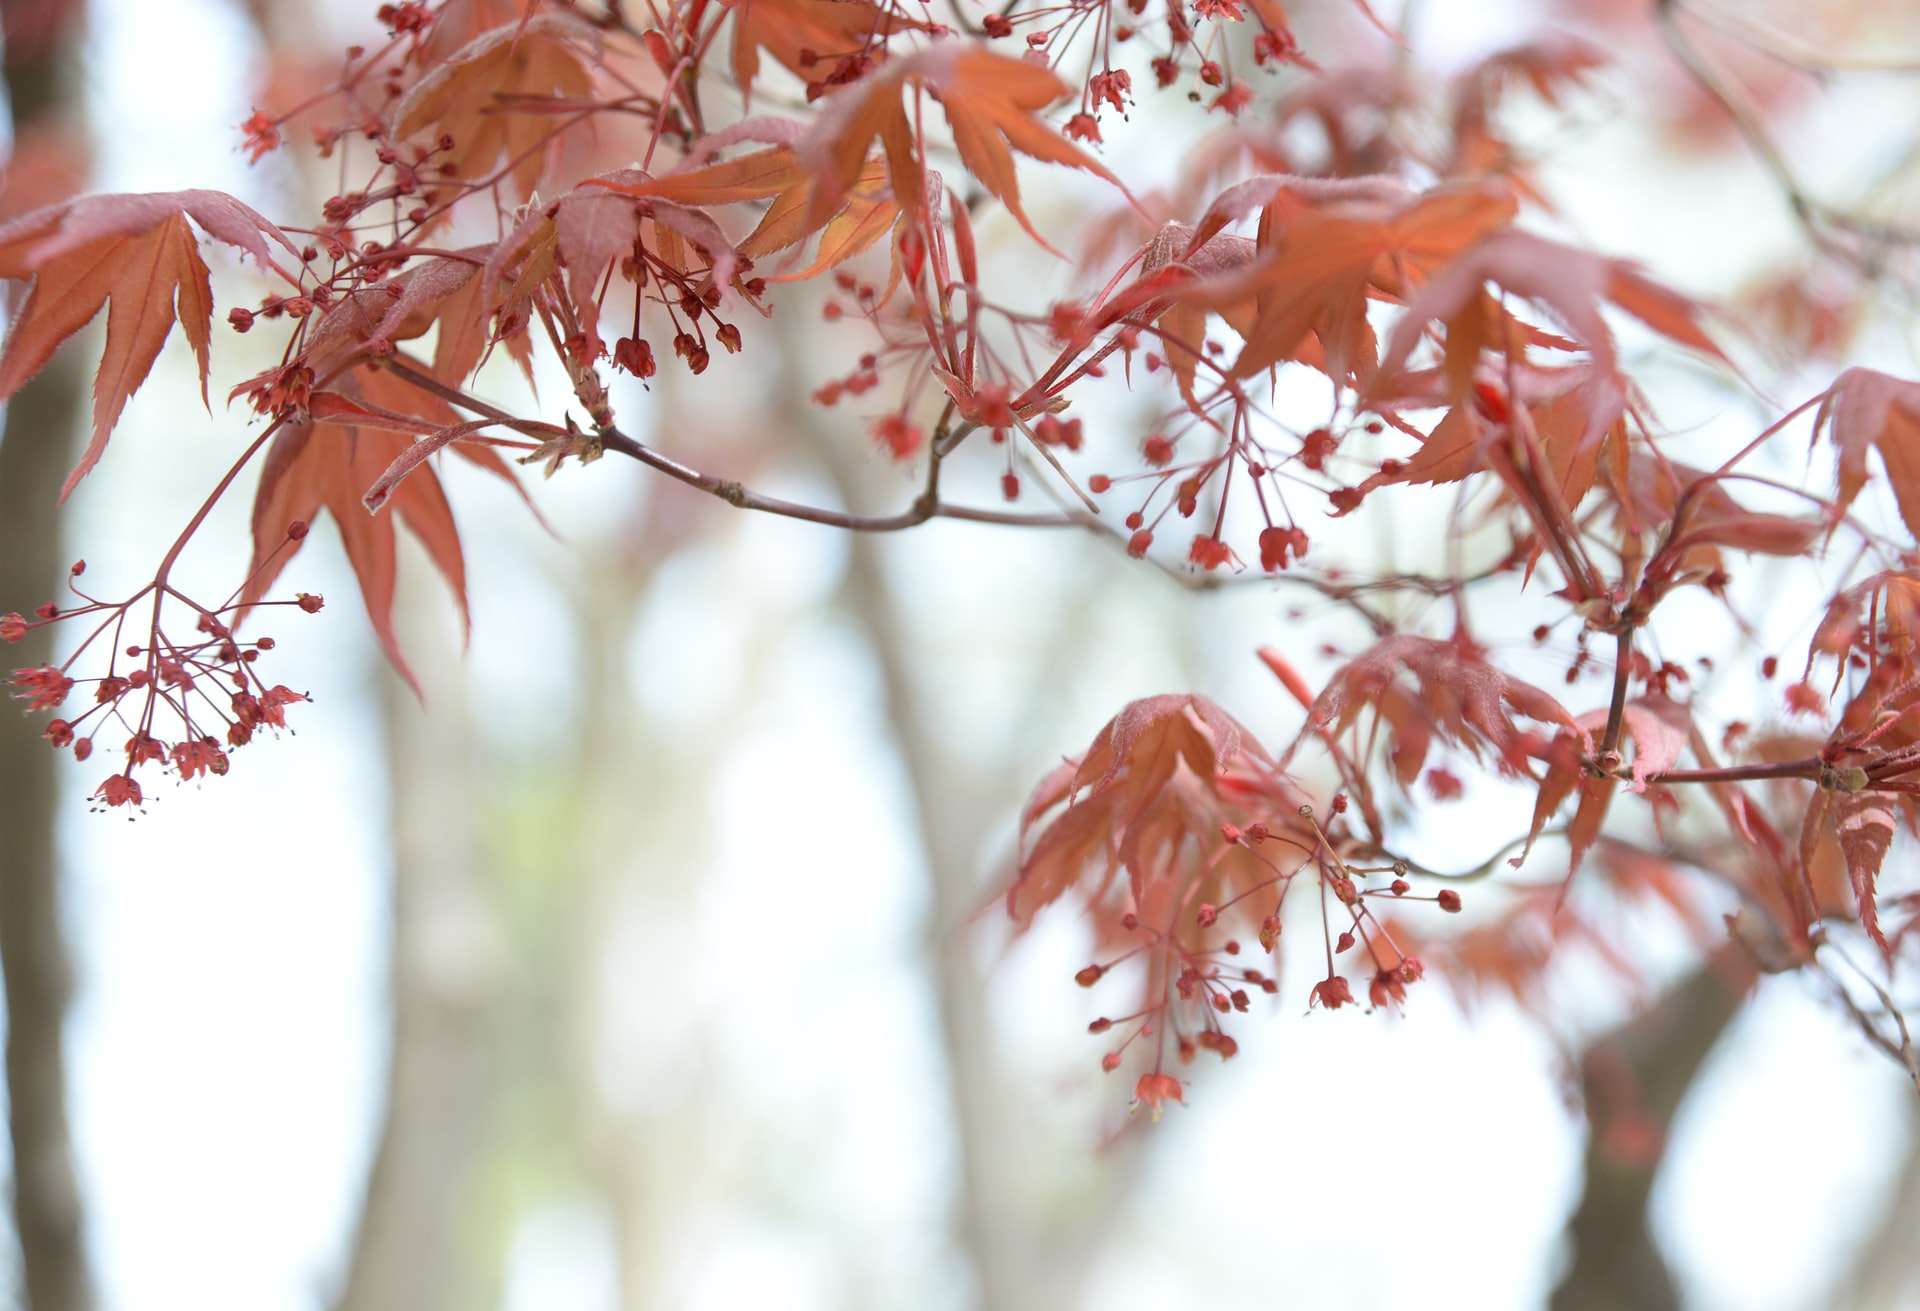  How to prune a Japanese maple, and when to do it for the best results